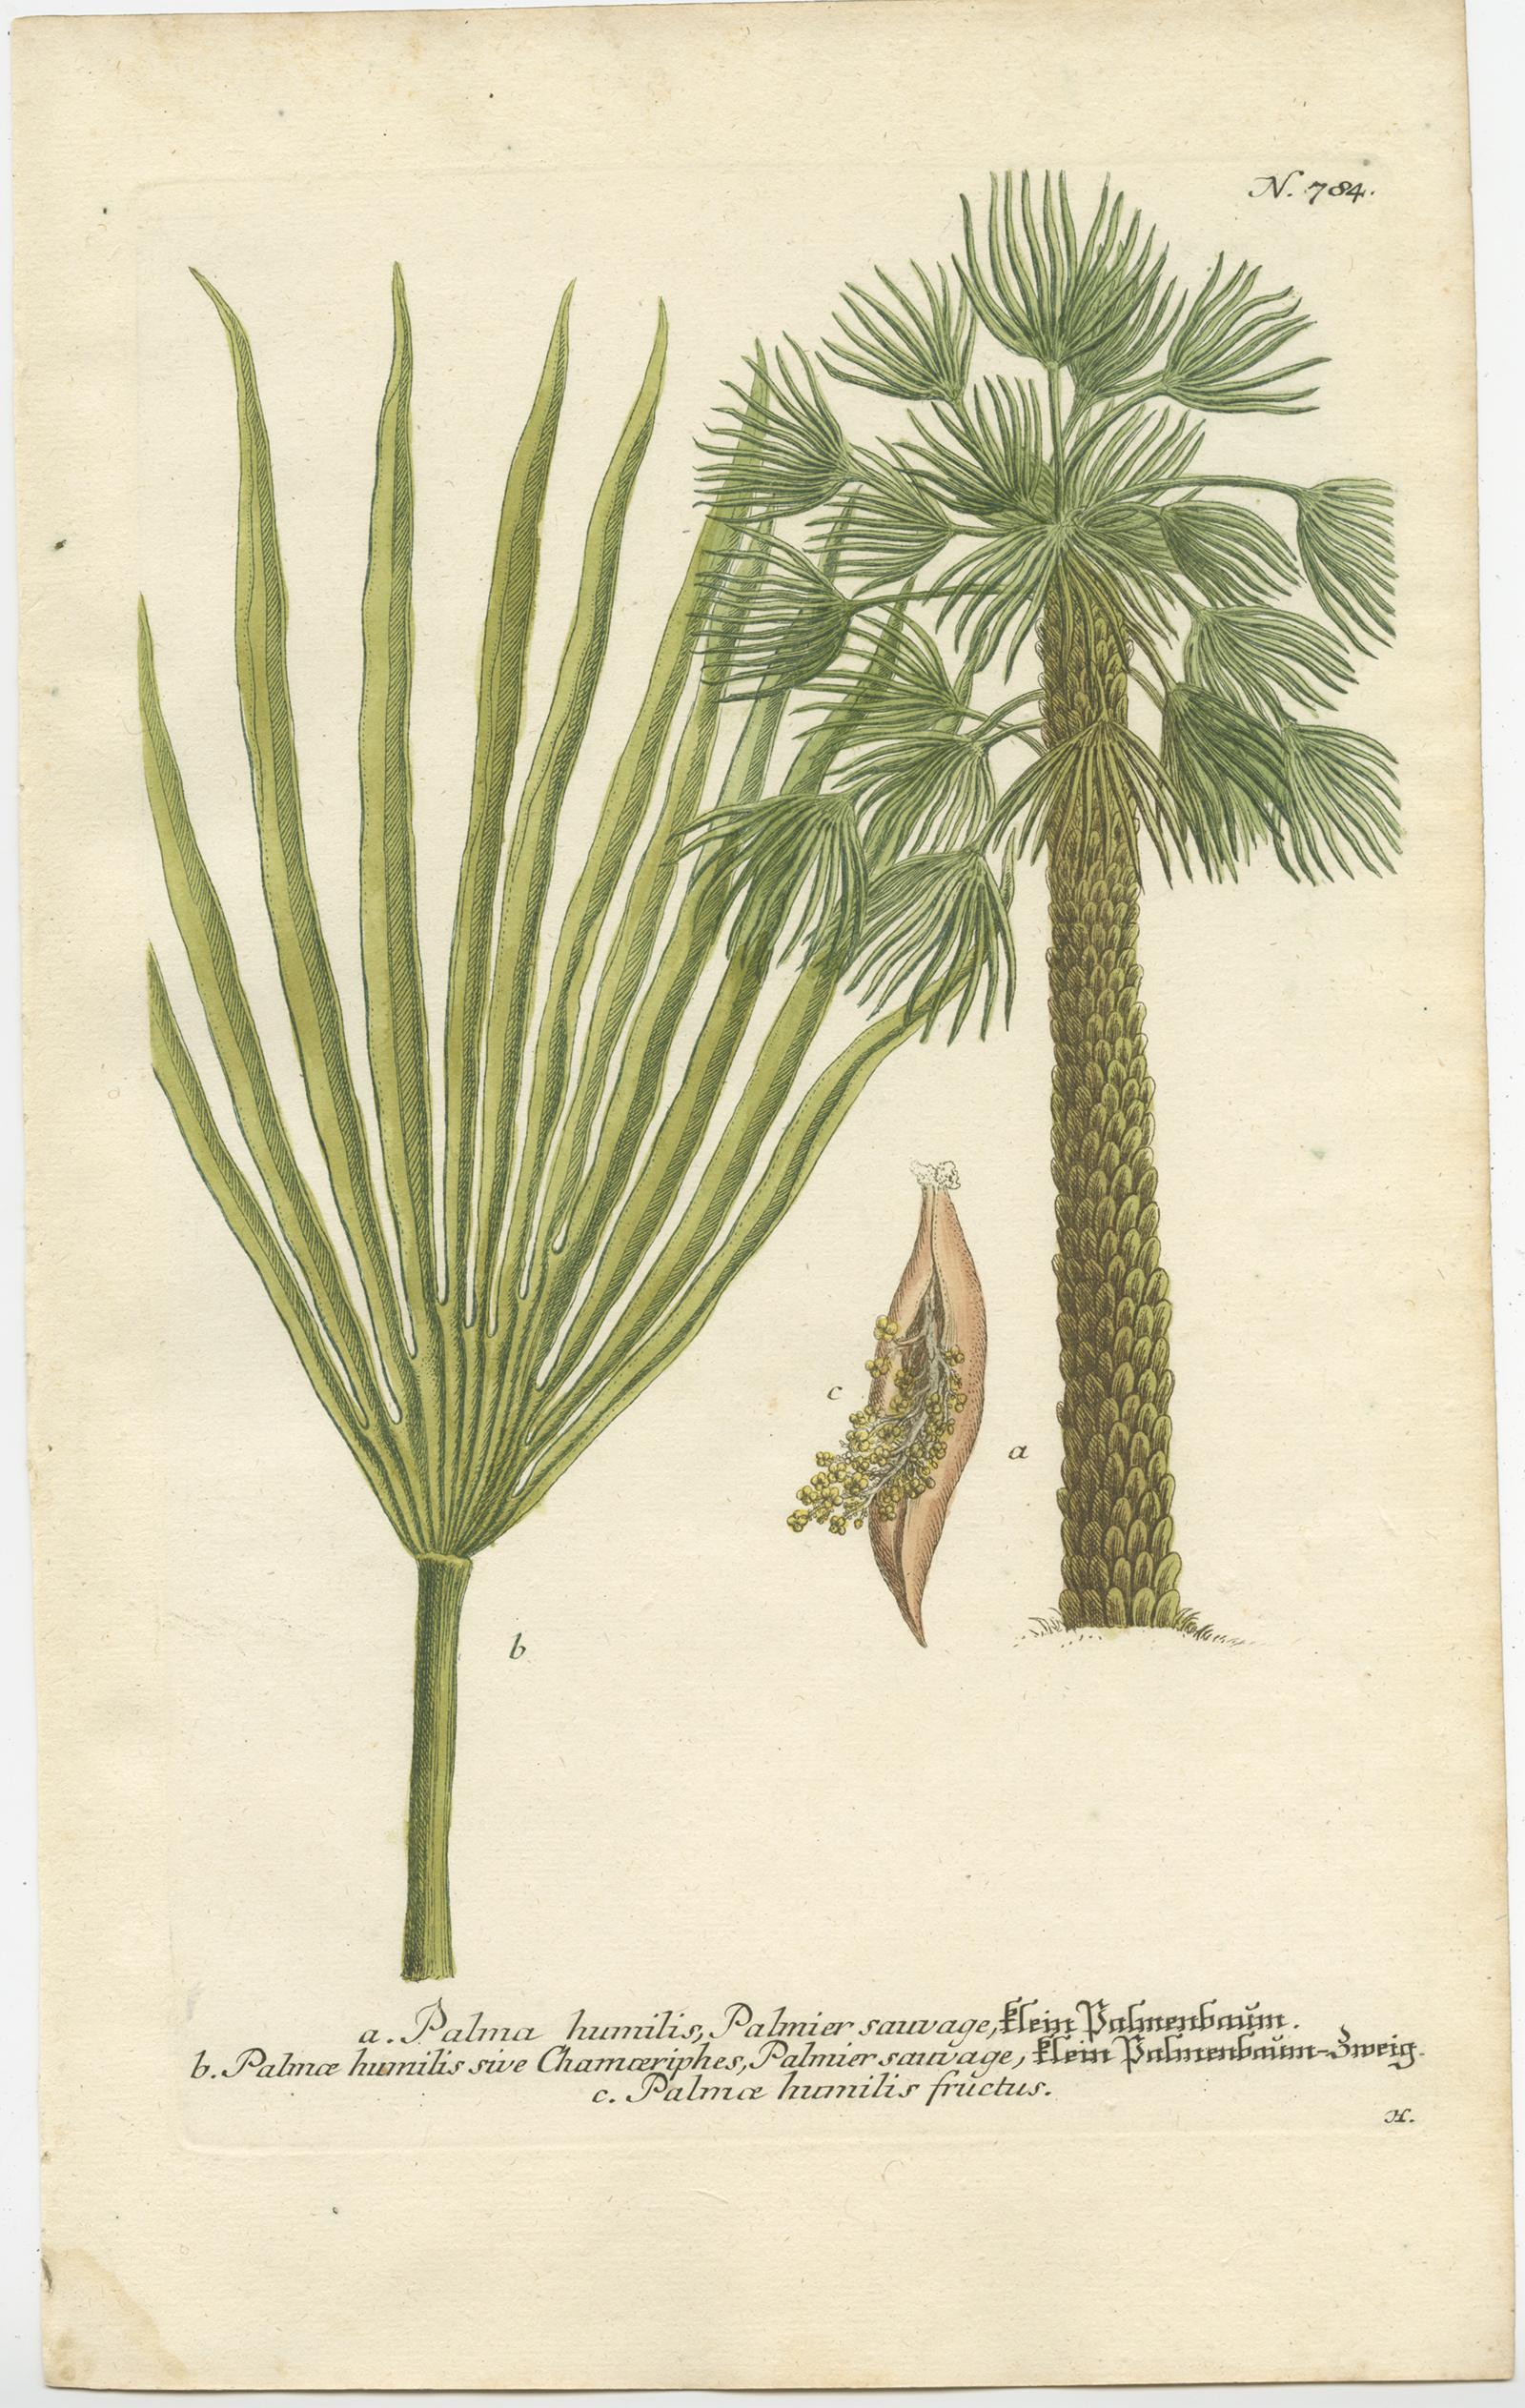 Set of two antique botany prints titled 'Palma humulis' and 'Palma prunifera'. It shows the European fan palm and the copernicia prunifera or the carnaúba palm. These prints originate from 'Phytanthoza Iconographia' by Johann Weinmann. Published